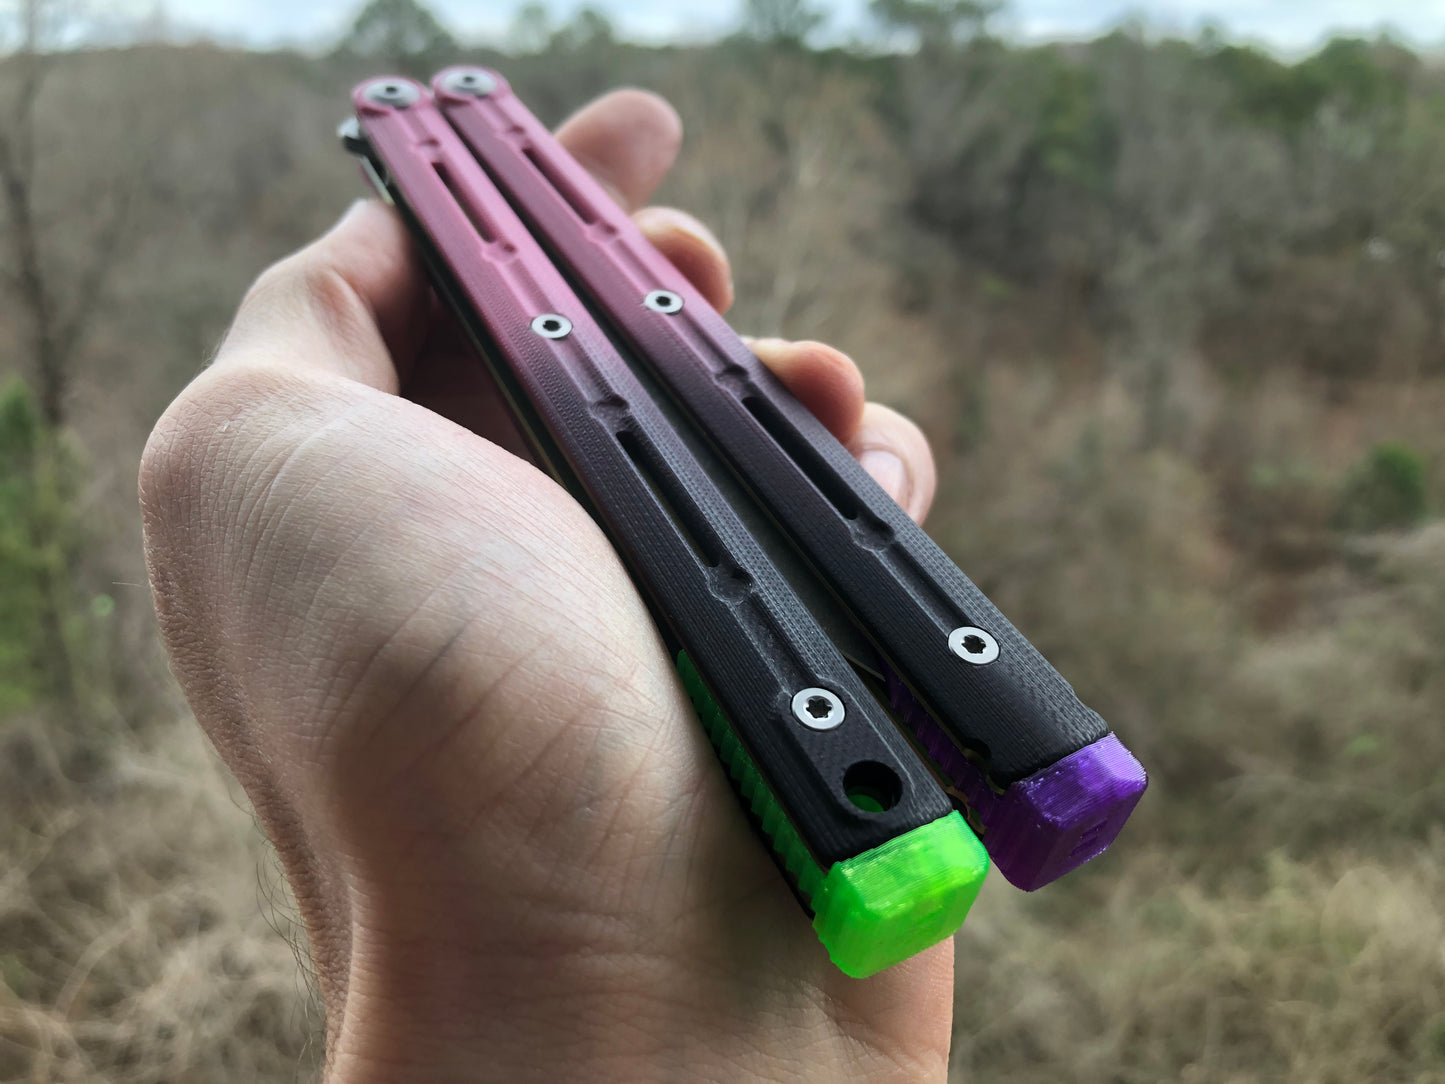 Improve the balance of your Maxace Serpent Striker v3 and Maxace Phantom balisong trainer with tungsten-weighted trainer blade inserts and extension spacers with jimping.